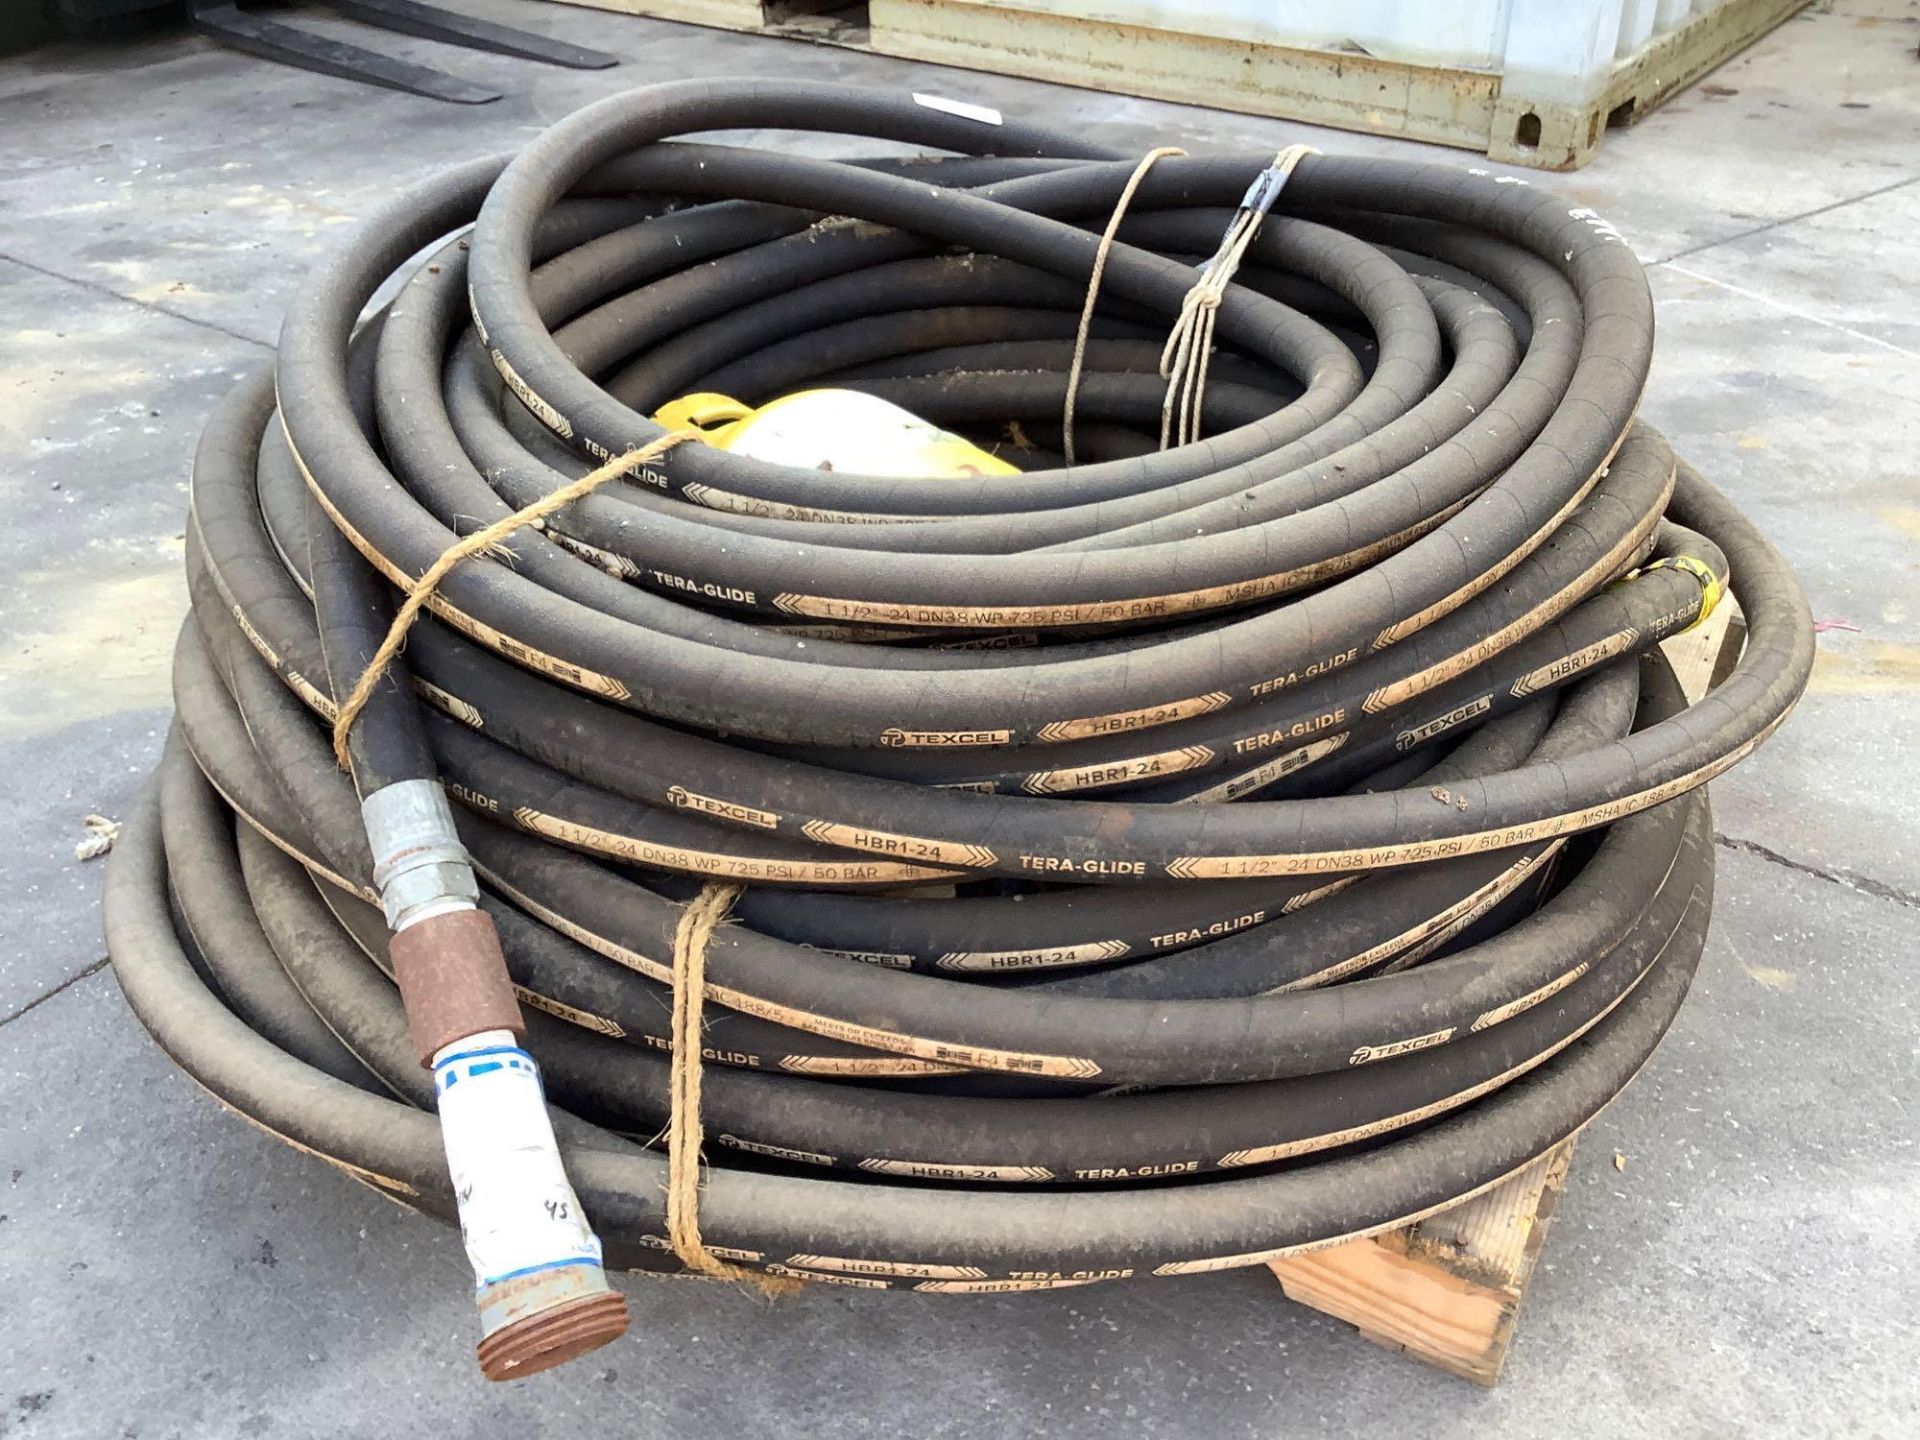 TEXCEL HBR1-24 INDUSTRIAL HOSE, 1 1/2”-24 DN38 WO 725 PSI / 50 BAR - Image 7 of 12